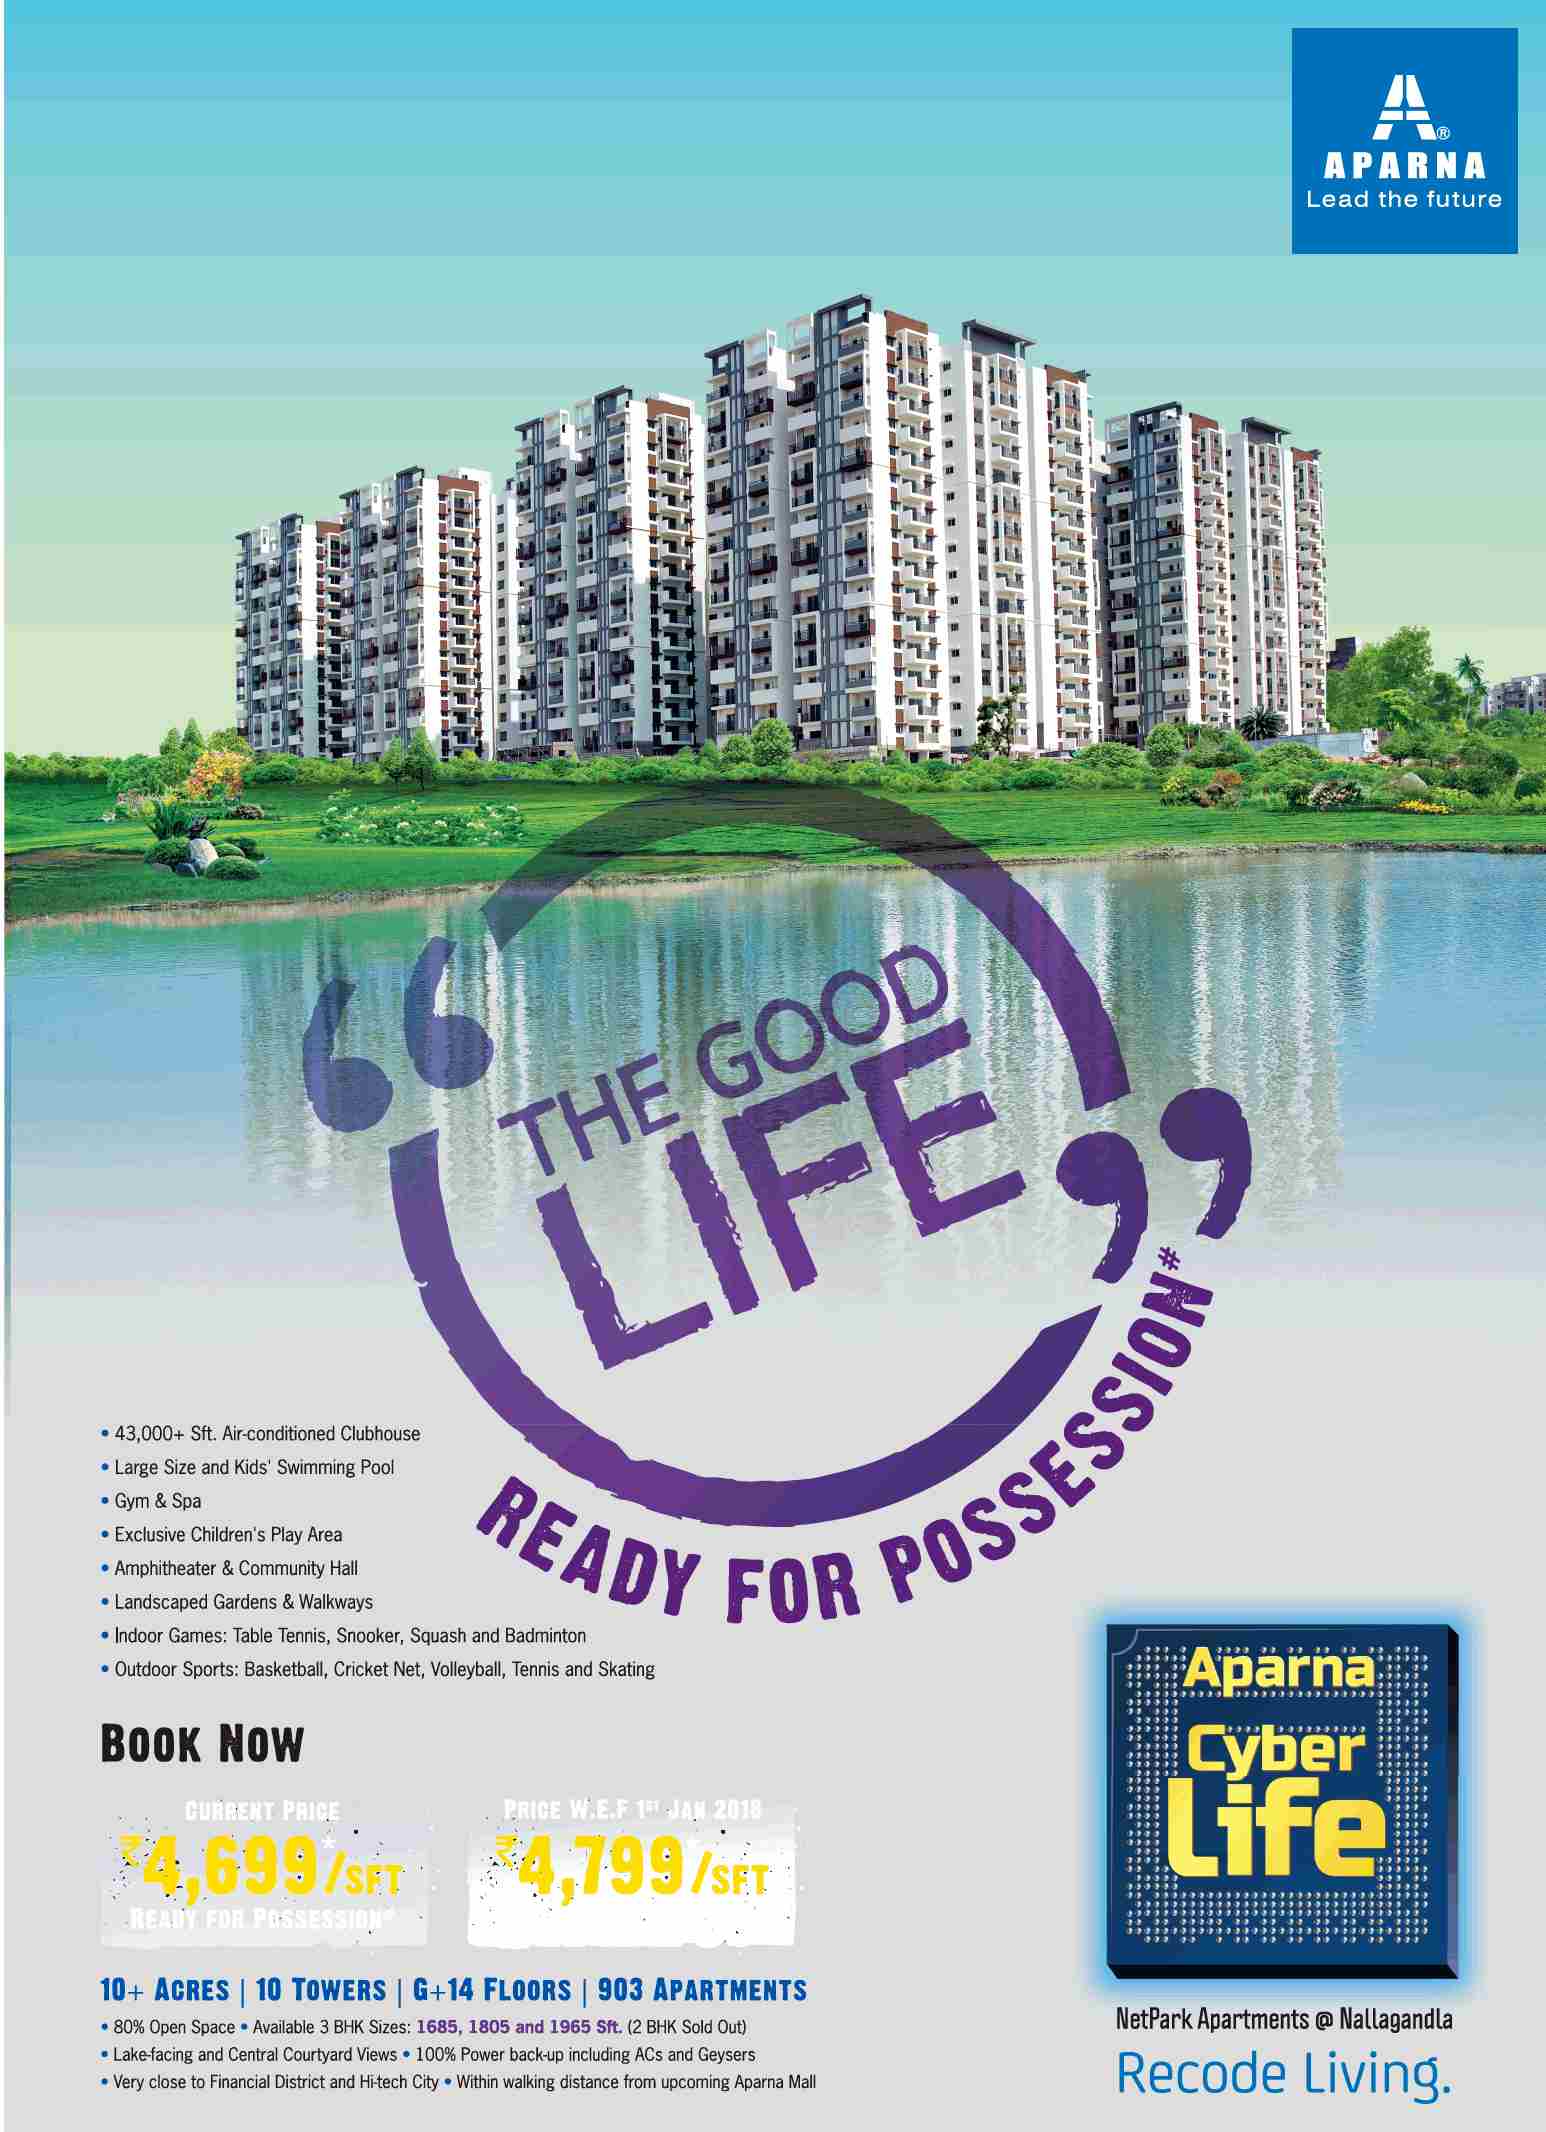 Recode your living by staying at Aparna Cyber Life in Hyderabad Update